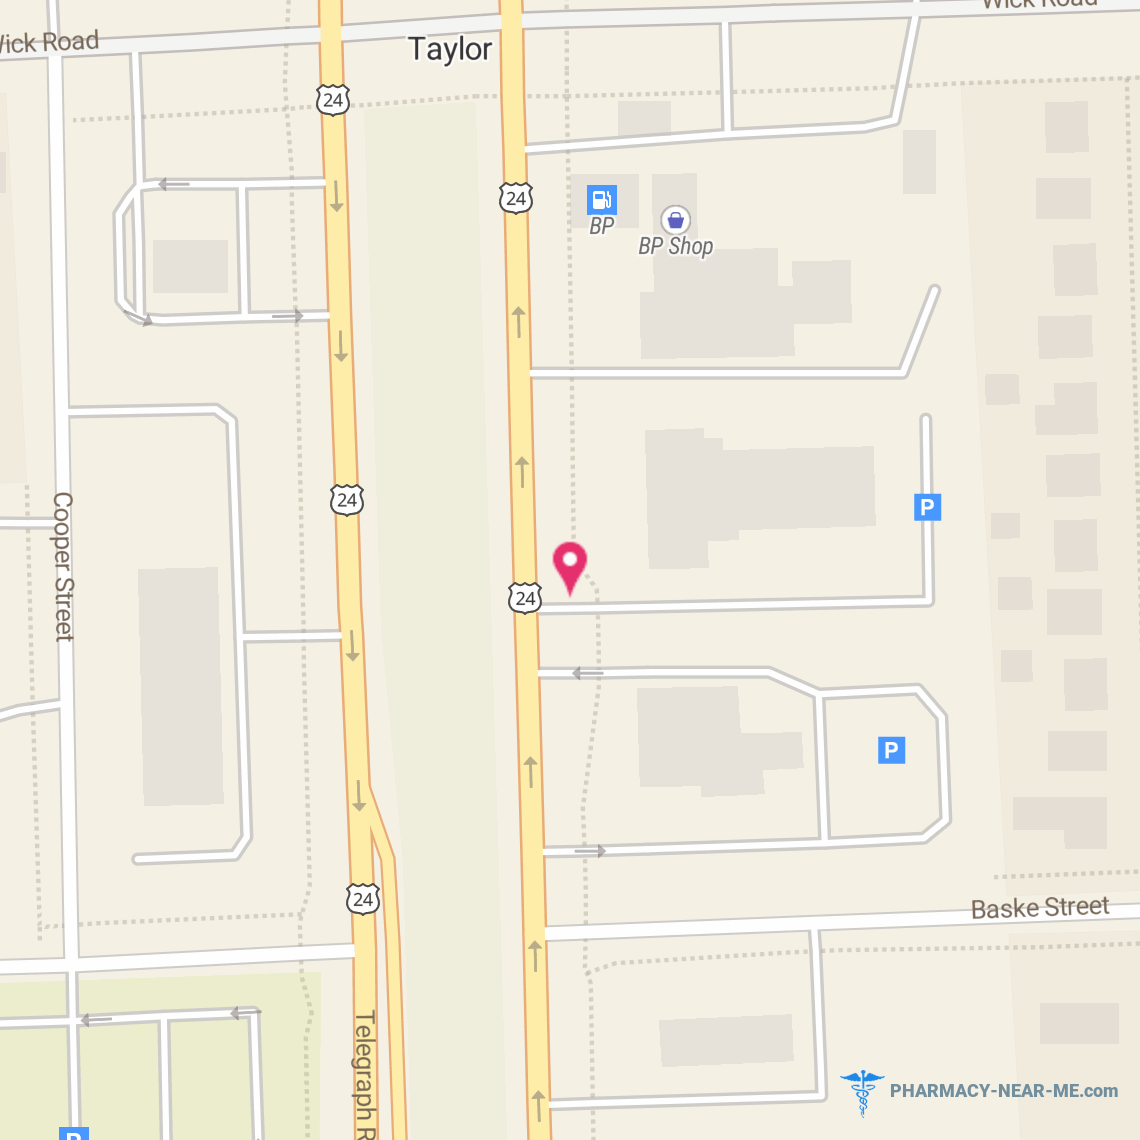 TAYLOR DISCOUNT DRUGS - Pharmacy Hours, Phone, Reviews & Information: 9320 Telegraph Road, Taylor, Michigan 48180, United States